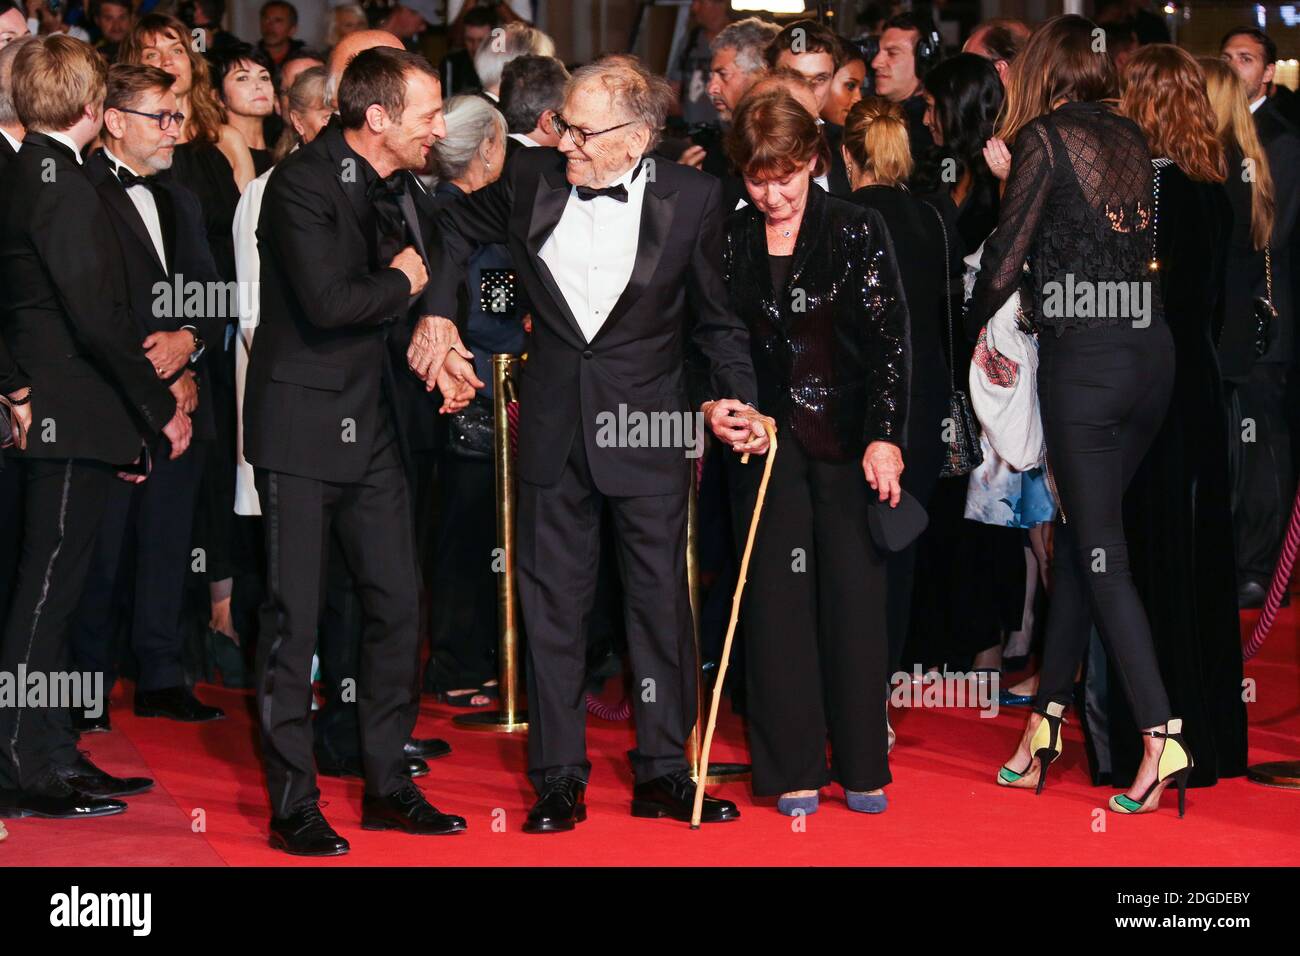 Jean-Louis Trintignant, Mathieu Kassovitz attend the 'Happy End' screening  during the 70th annual Cannes Film